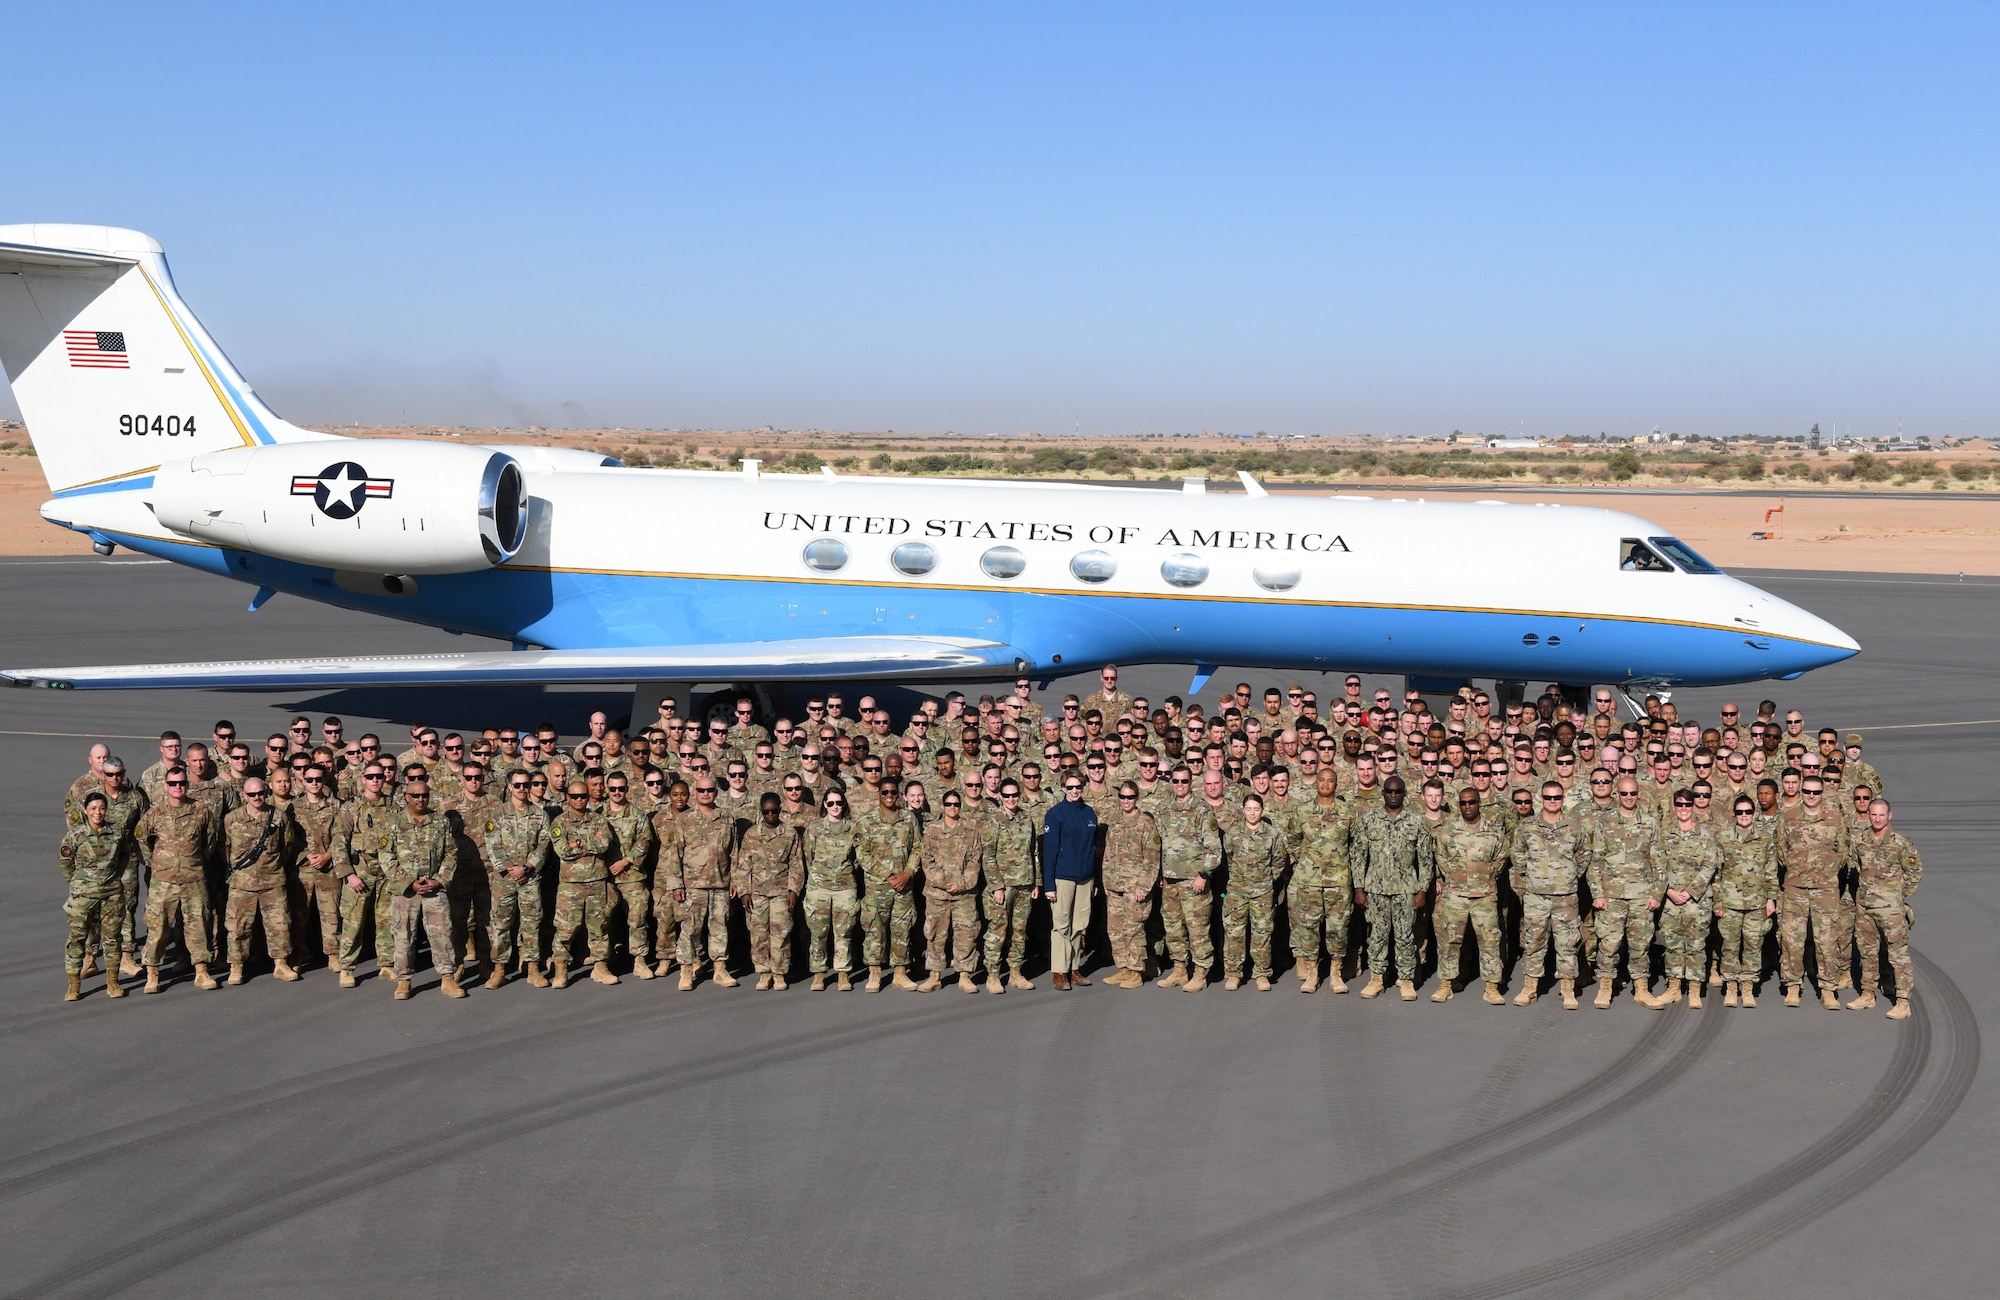 Secretary of the Air Force Barbara M. Barrett and service members deployed to Nigerien Air Base 201 pose for a photo in Agadez, Niger, Dec. 21, 2019. While at the installation, Barrett learned how each unit supports the mission from building the future of the base to defending its assets and personnel. (U.S. Air Force photo by Staff Sgt. Alex Fox Echols III)